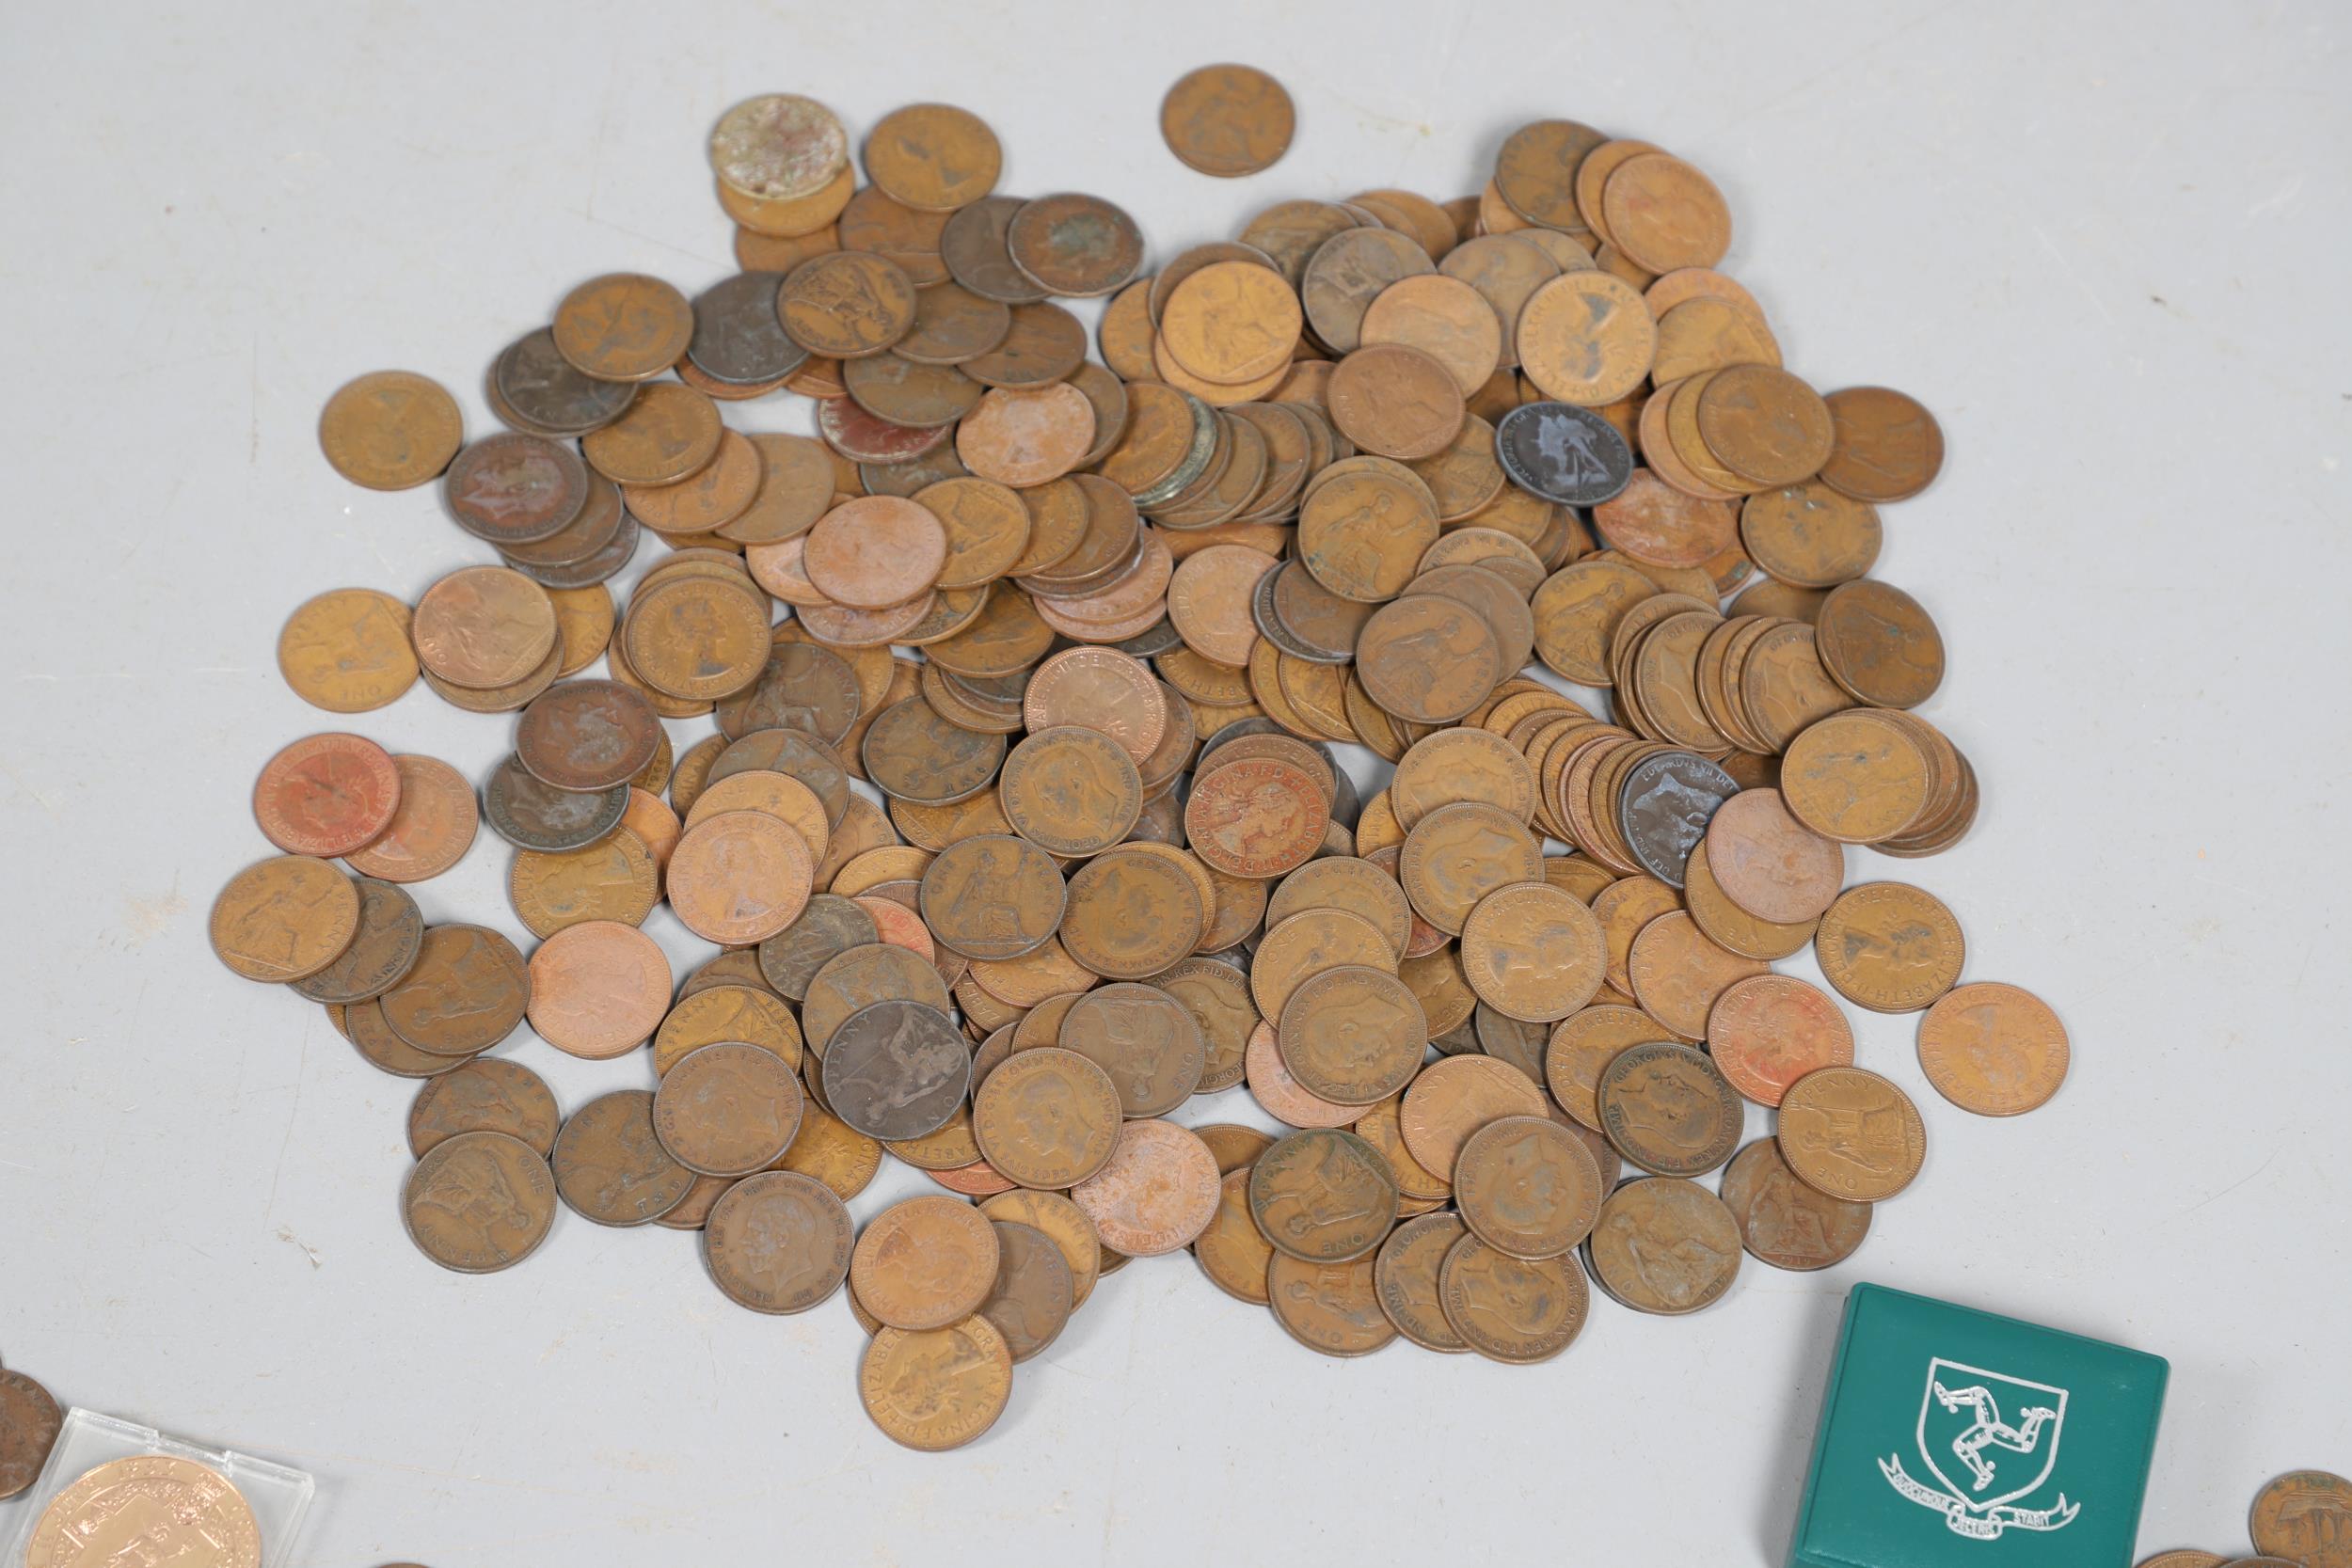 A LARGE COLLECTION OF WORLD COINS AND SIMILAR BRITISH COINS. - Image 15 of 20